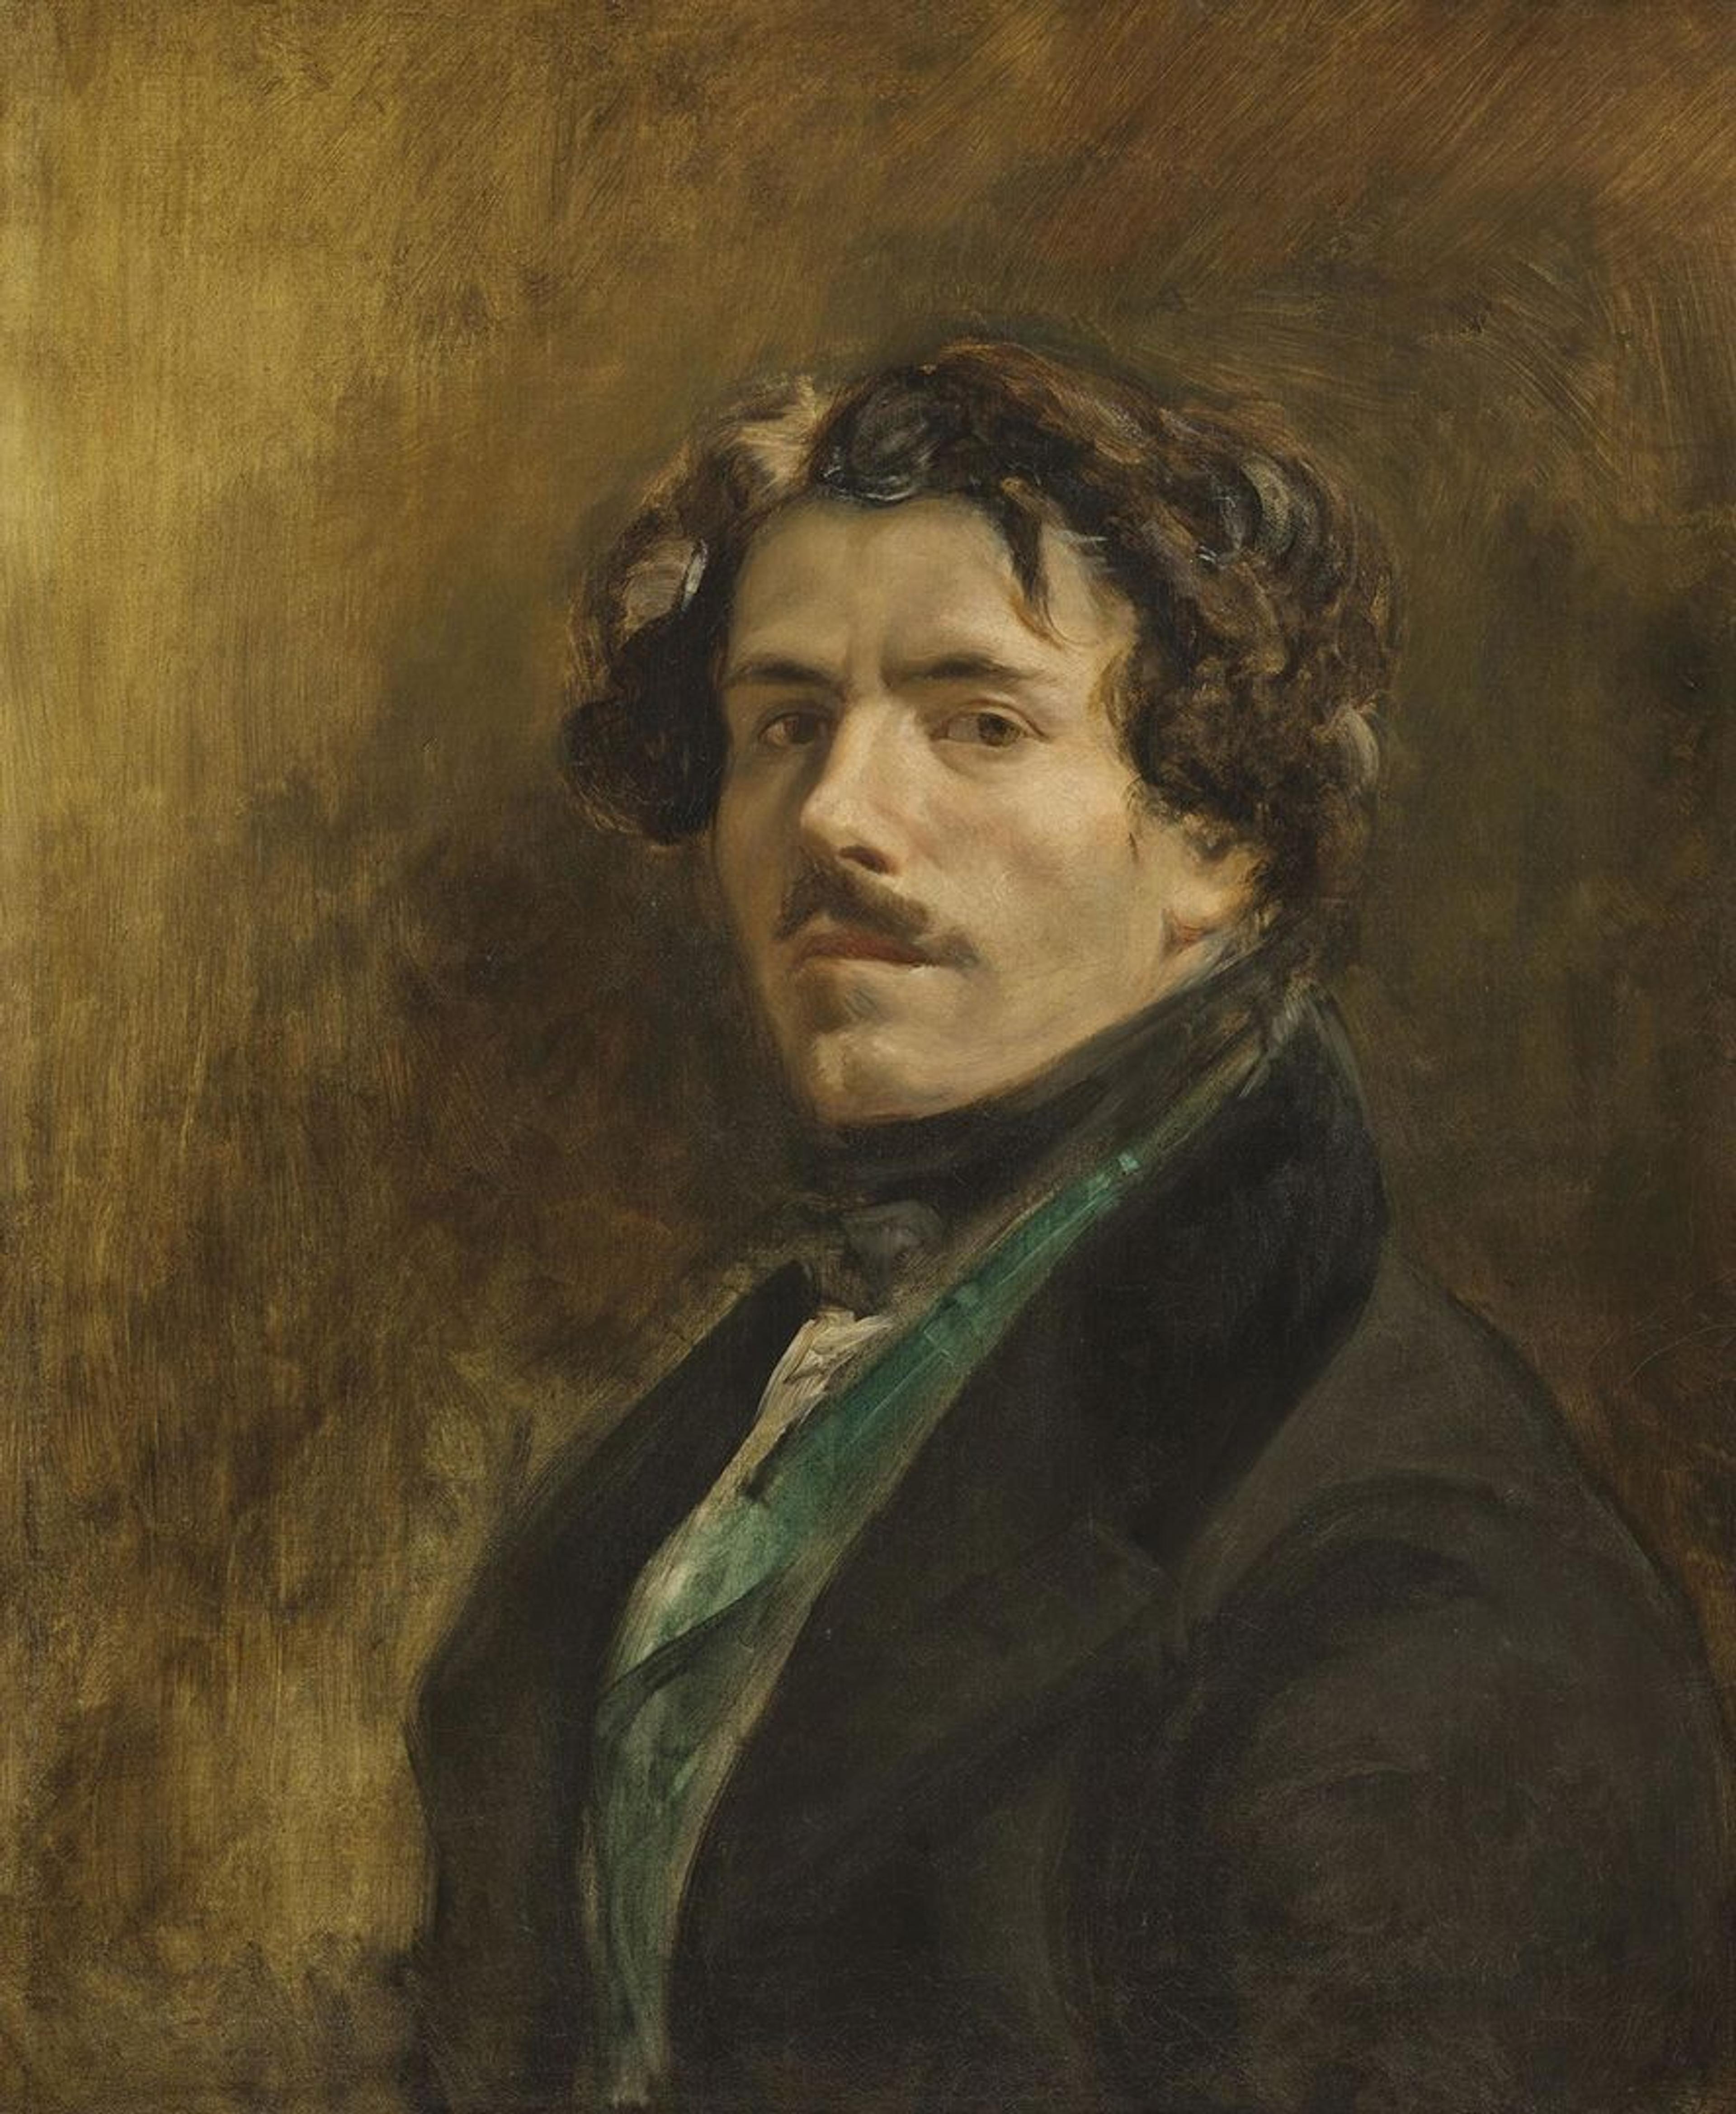 A self-portrait painting by Eugene Delacroix in which the artist is wearing a dark green vest and a black coat